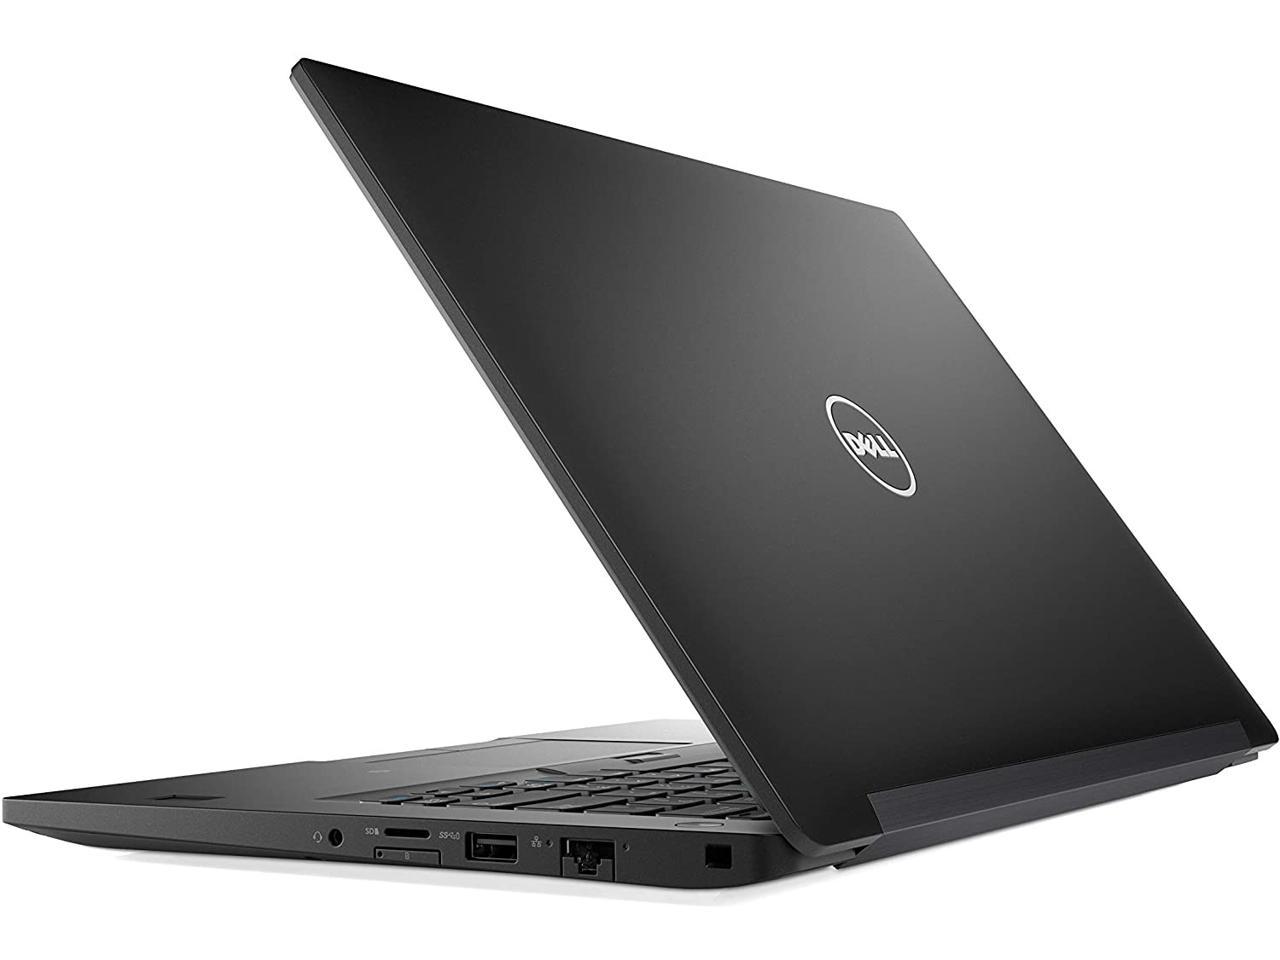 Refurbished Dell Latitude 7490 14 Fhd 1080p Business Laptop 8th Gen